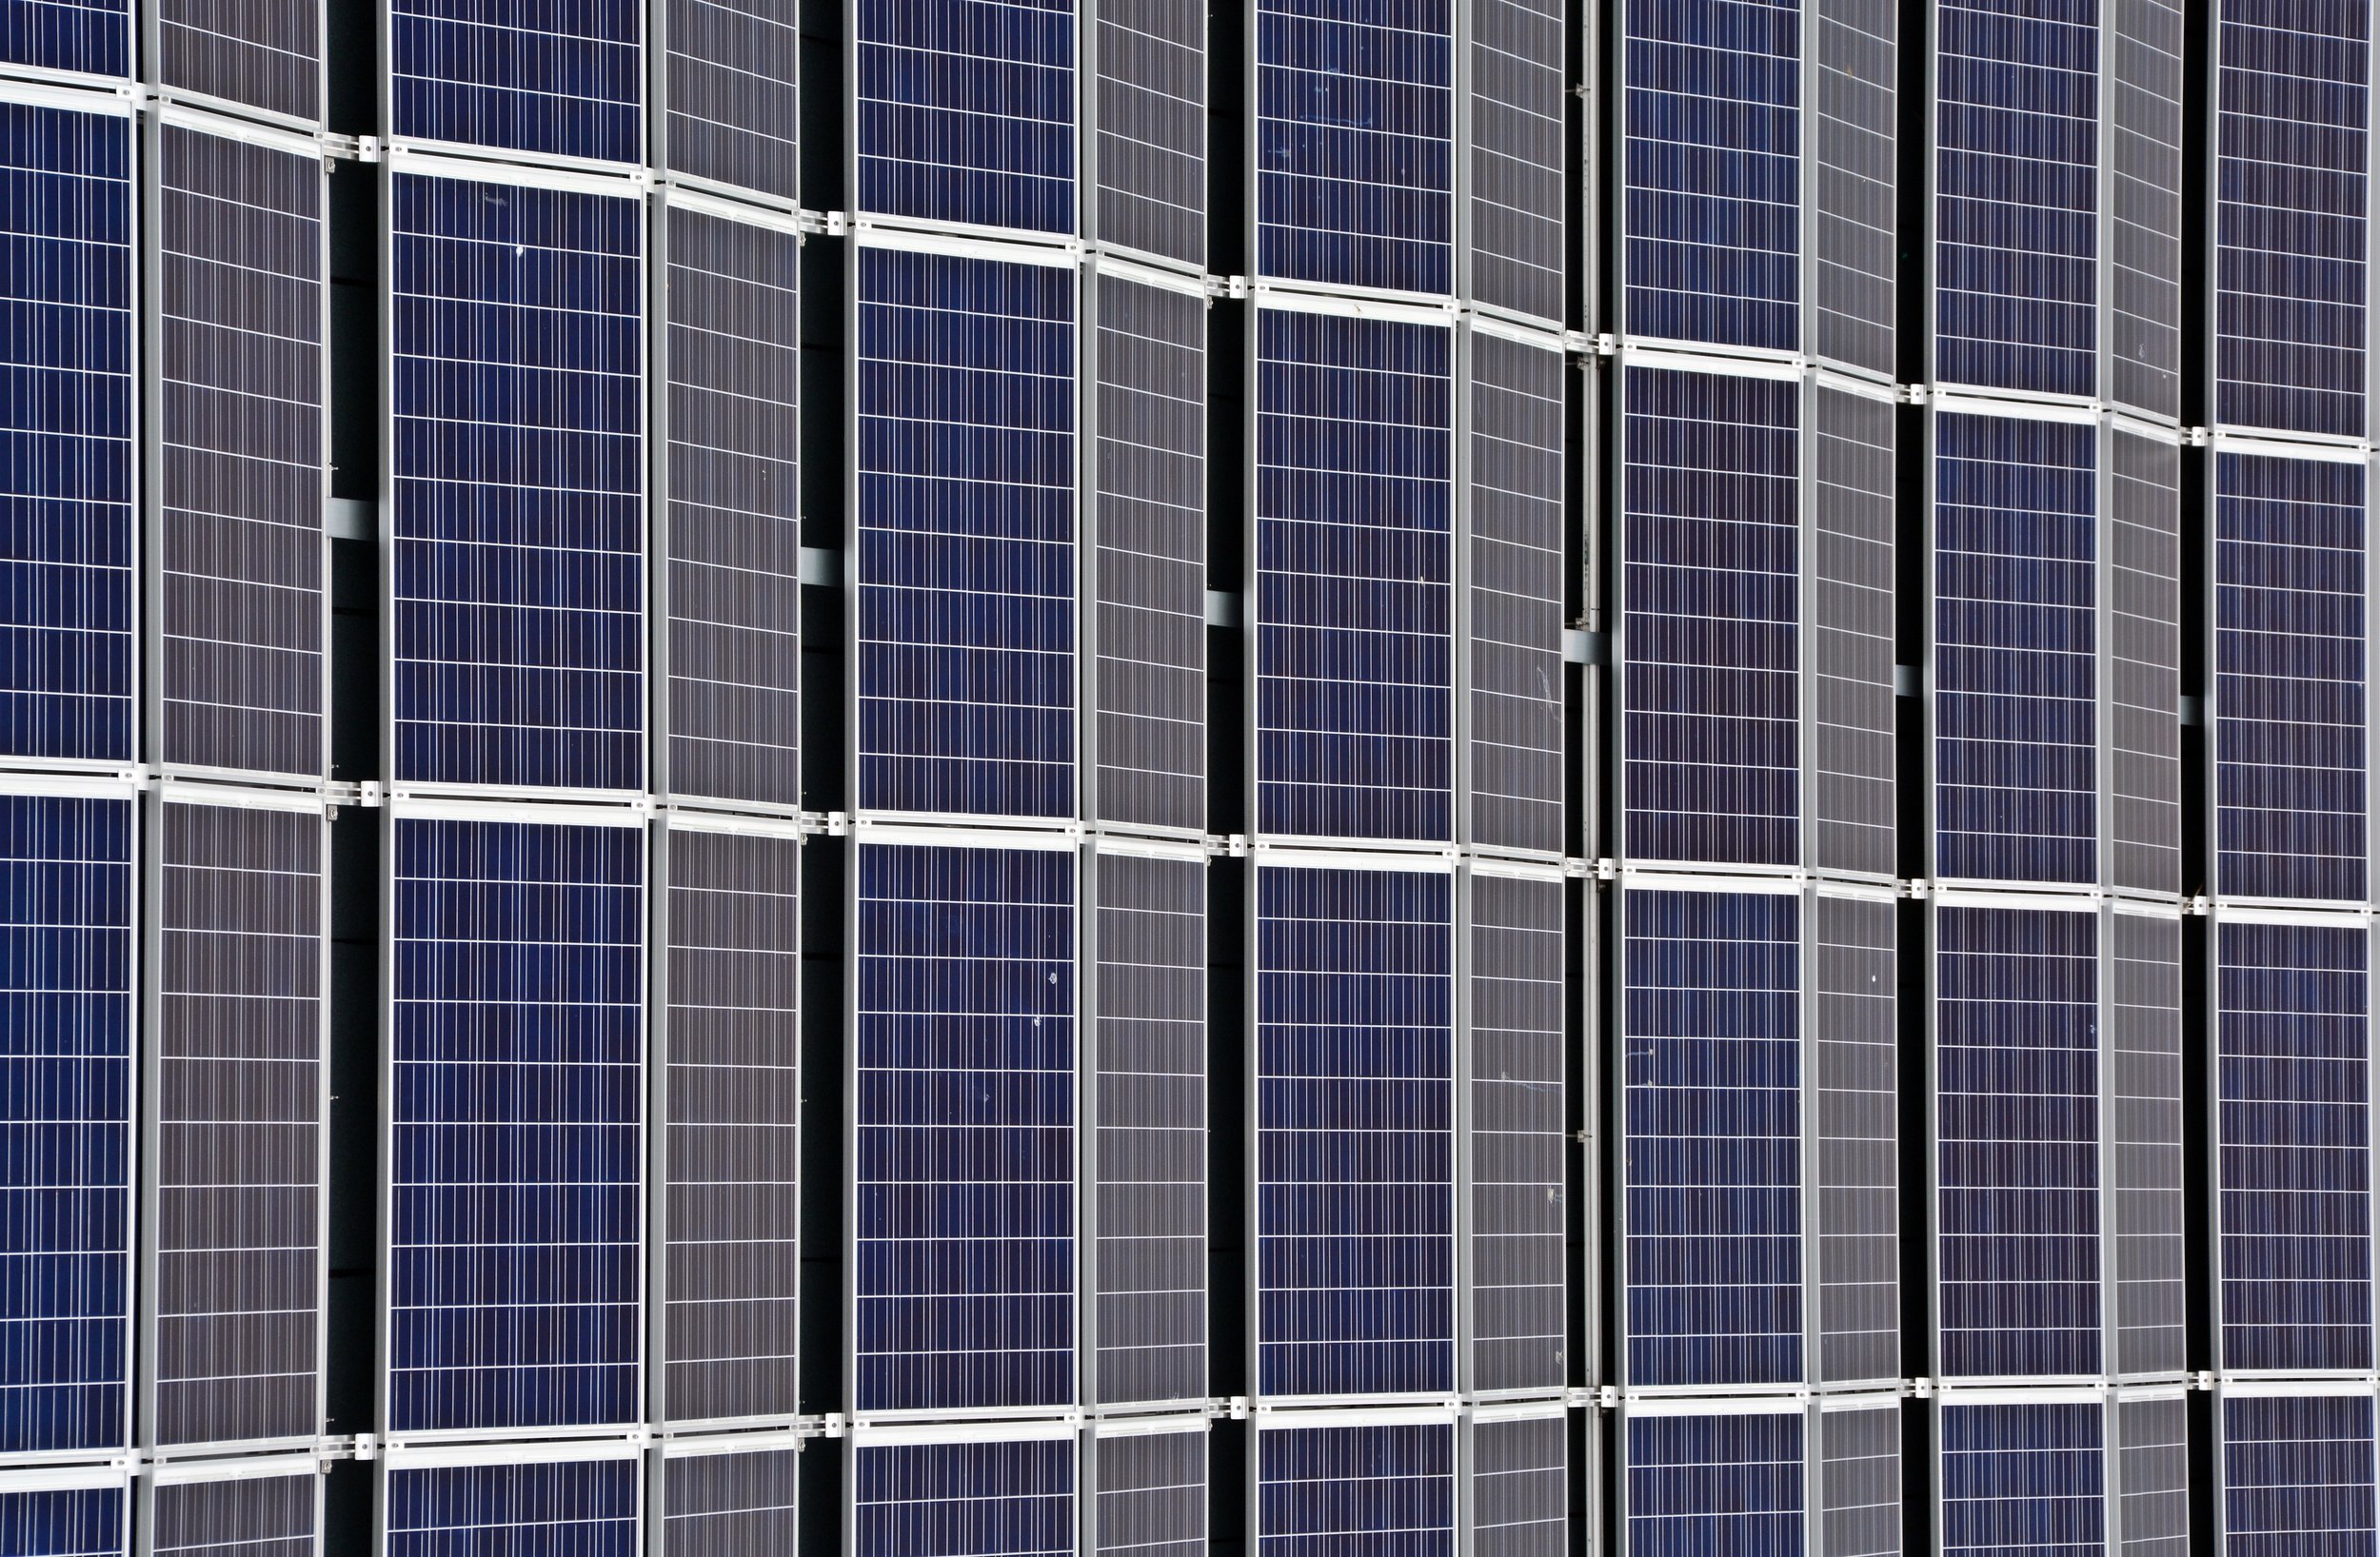 Solar PV generates clean electricity from sunlight.